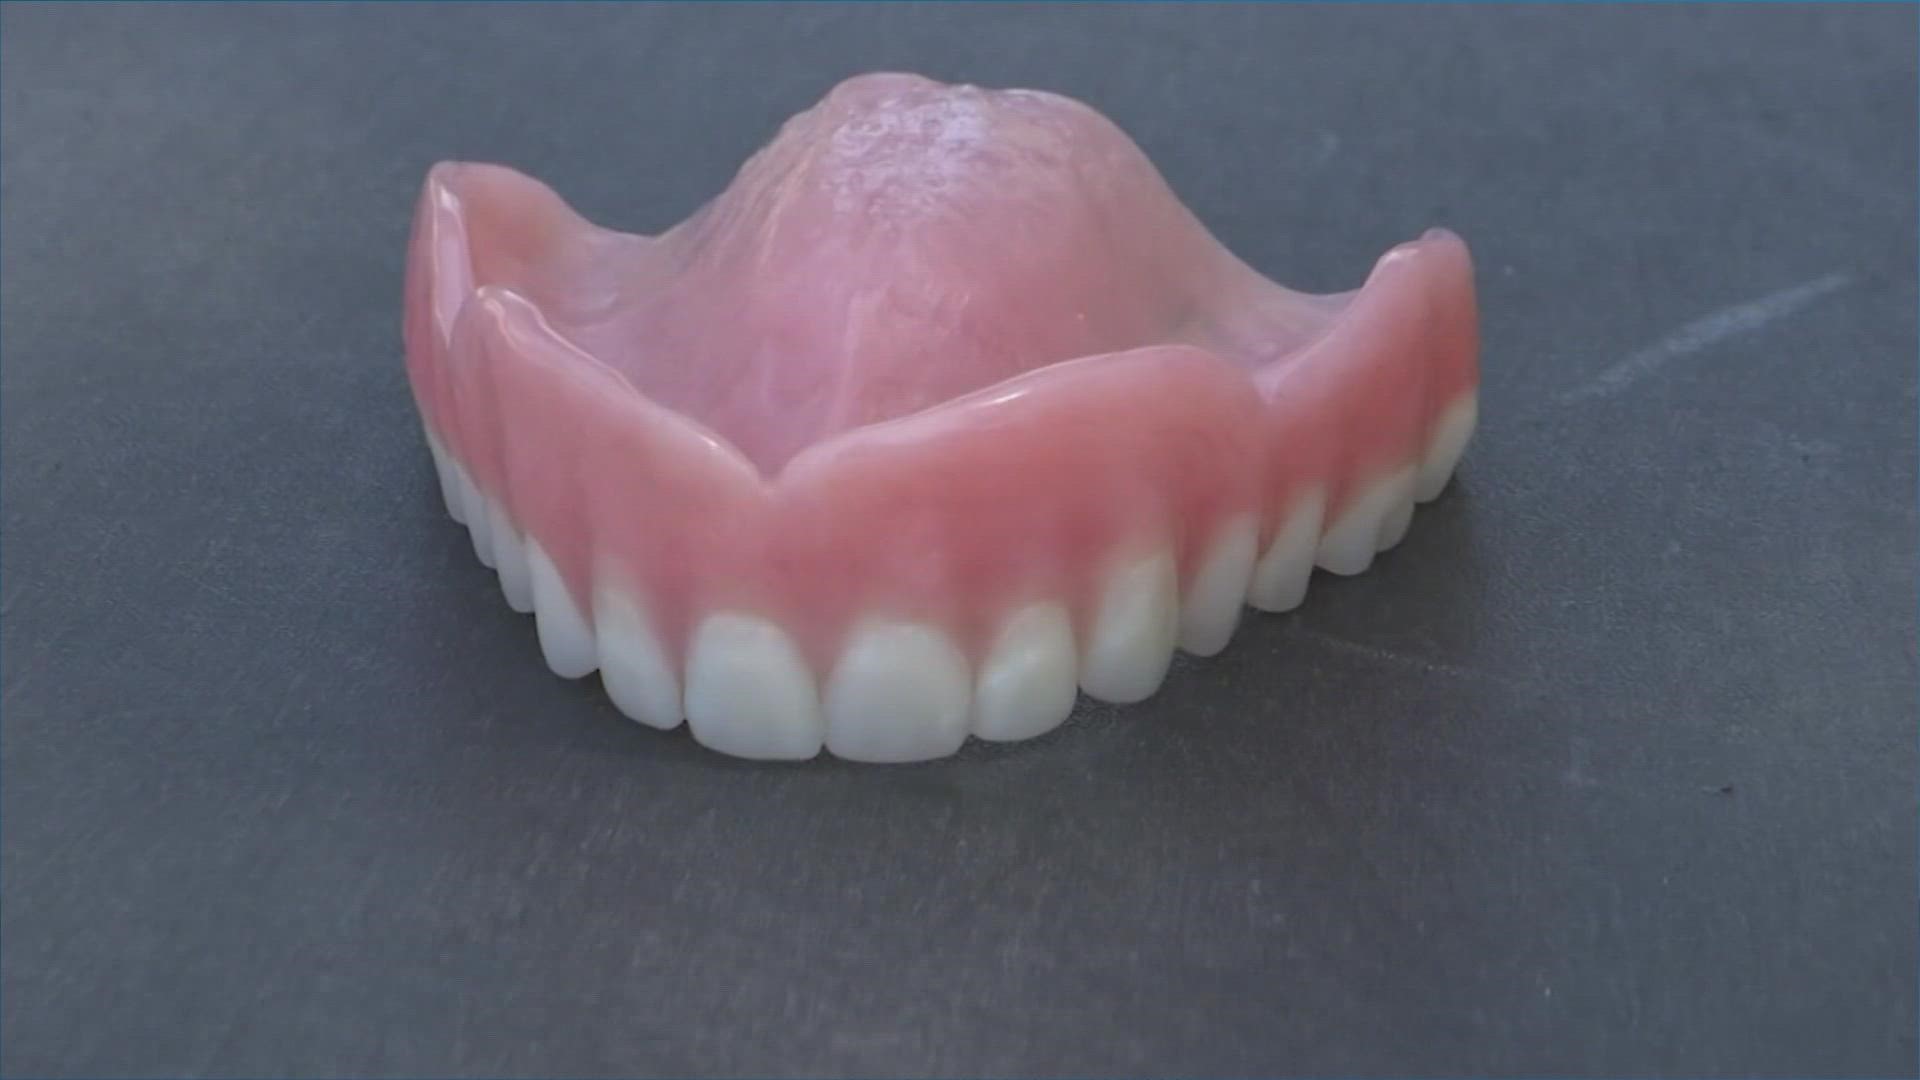 A Wisconsin man's bad luck turned into good luck after losing his dentures while vacationing in Gulf Shores, Alabama.